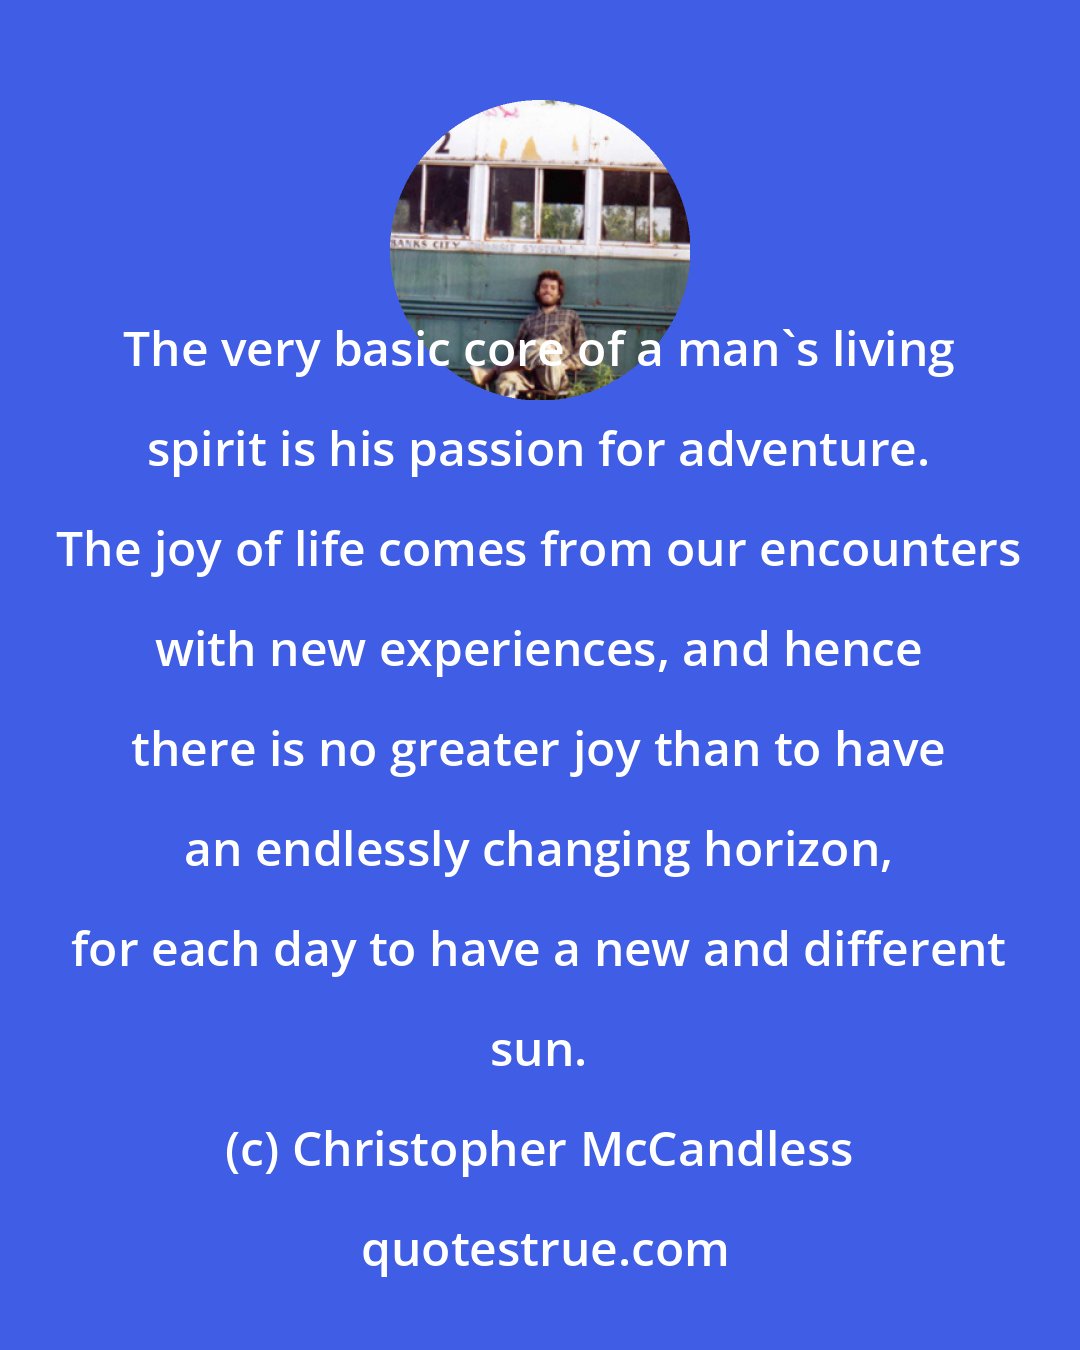 Christopher McCandless: The very basic core of a man's living spirit is his passion for adventure. The joy of life comes from our encounters with new experiences, and hence there is no greater joy than to have an endlessly changing horizon, for each day to have a new and different sun.